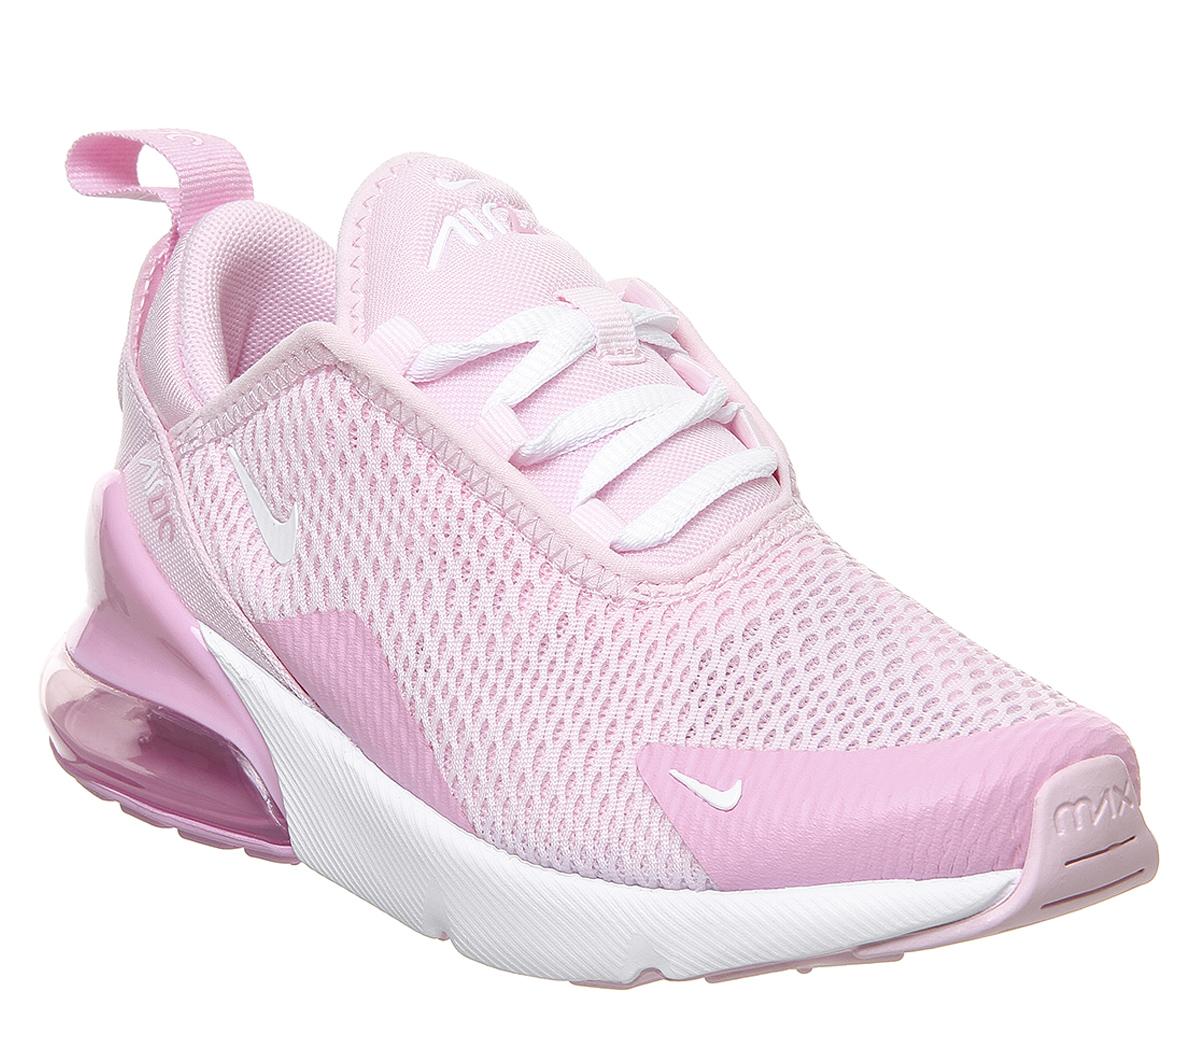 Nike Air Max 270 Ps Trainers Pink Foam 